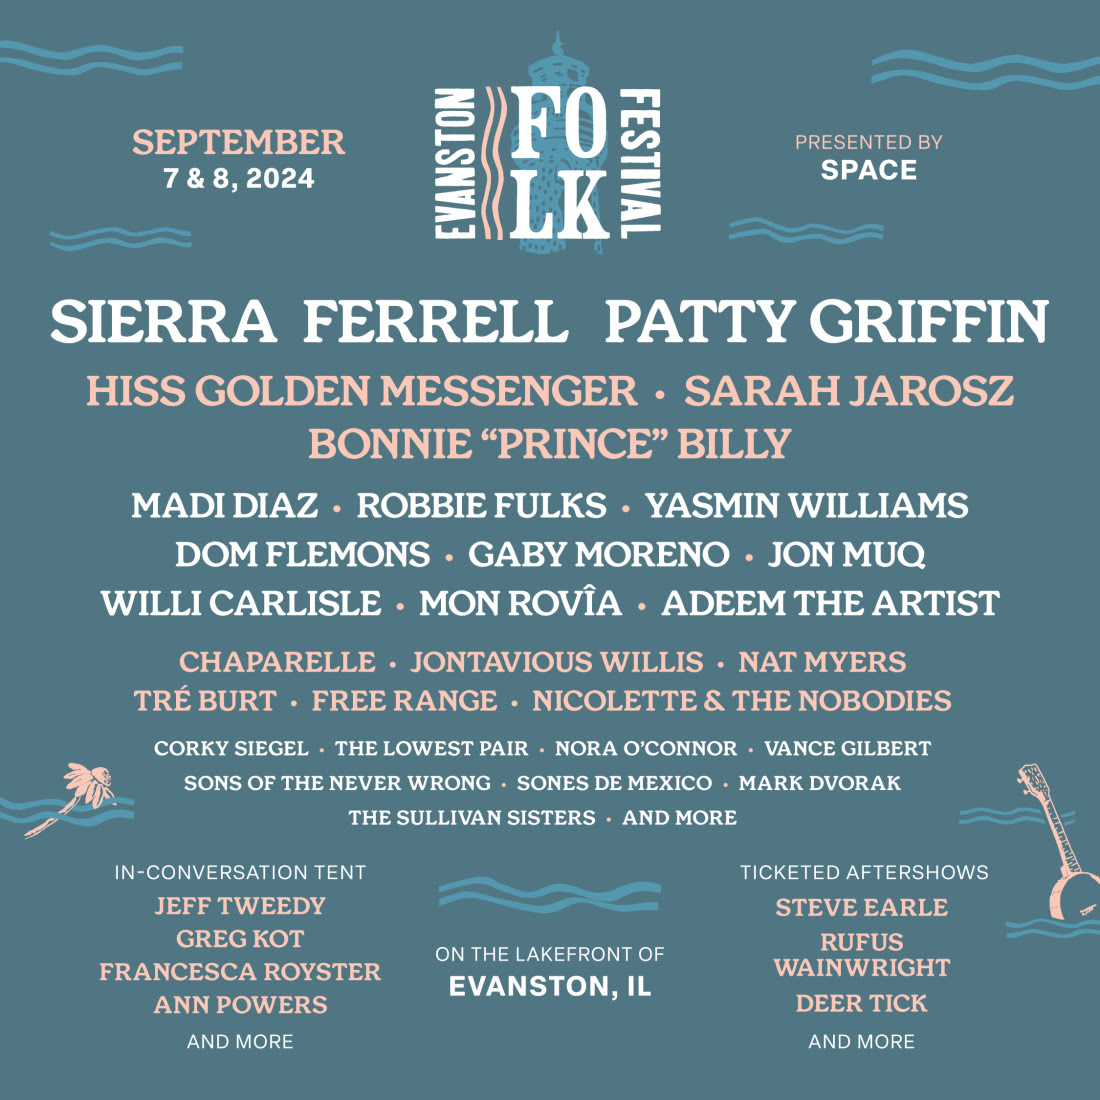 🎵A new music festival is coming to Evanston! Get excited for the first-ever Evanston Folk Festival, hosted by @evanstonspace, at Dawes Park's lakefront on Sept. 7 and 8. This festival will celebrate the rich folk music tradition. Check out the lineup: evanstonfolkfestival.com.